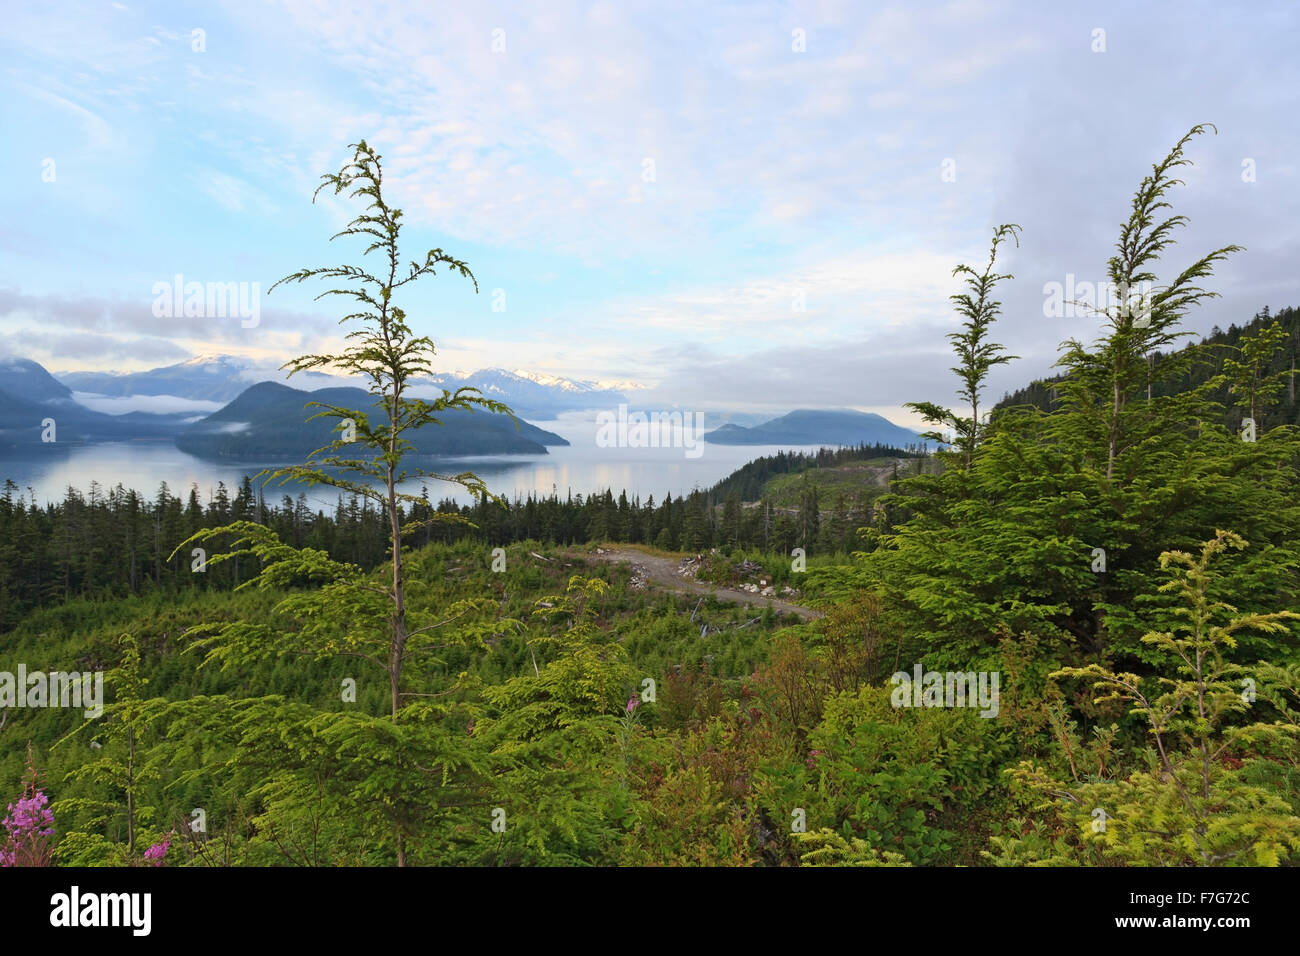 View of Douglas Channel from a clearcut on Bish Creek Forest Service road, Kitimat, British Columbia Stock Photo